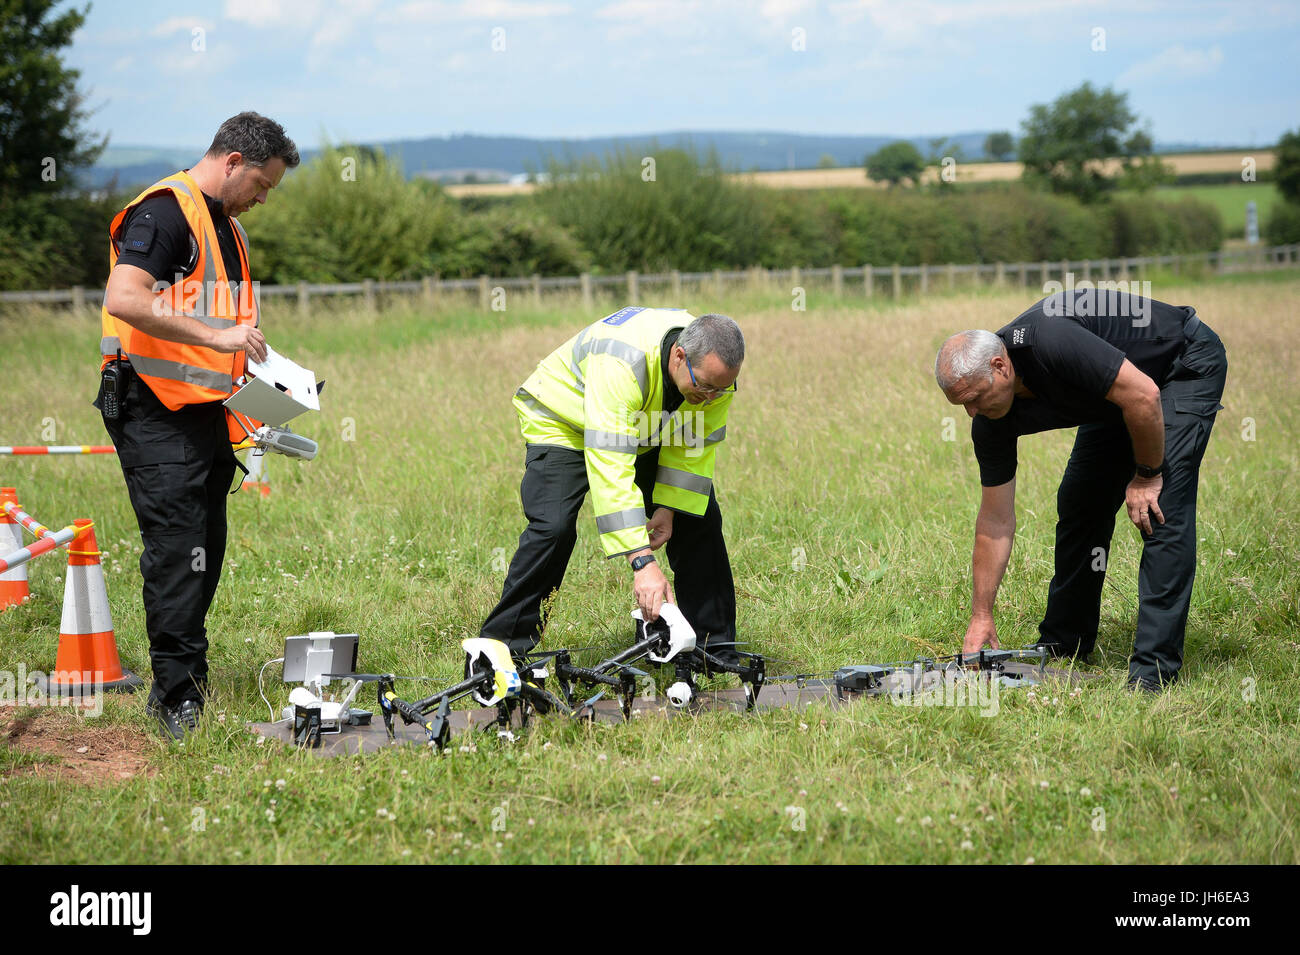 Officers from Devon & Cornwall and Dorset Police check drones and equipment, as they launch the first fully operational drone unit used by police at Westpoint Arena in Clyst St Mary, near Exeter, in co-operation with Dorset Police. Stock Photo